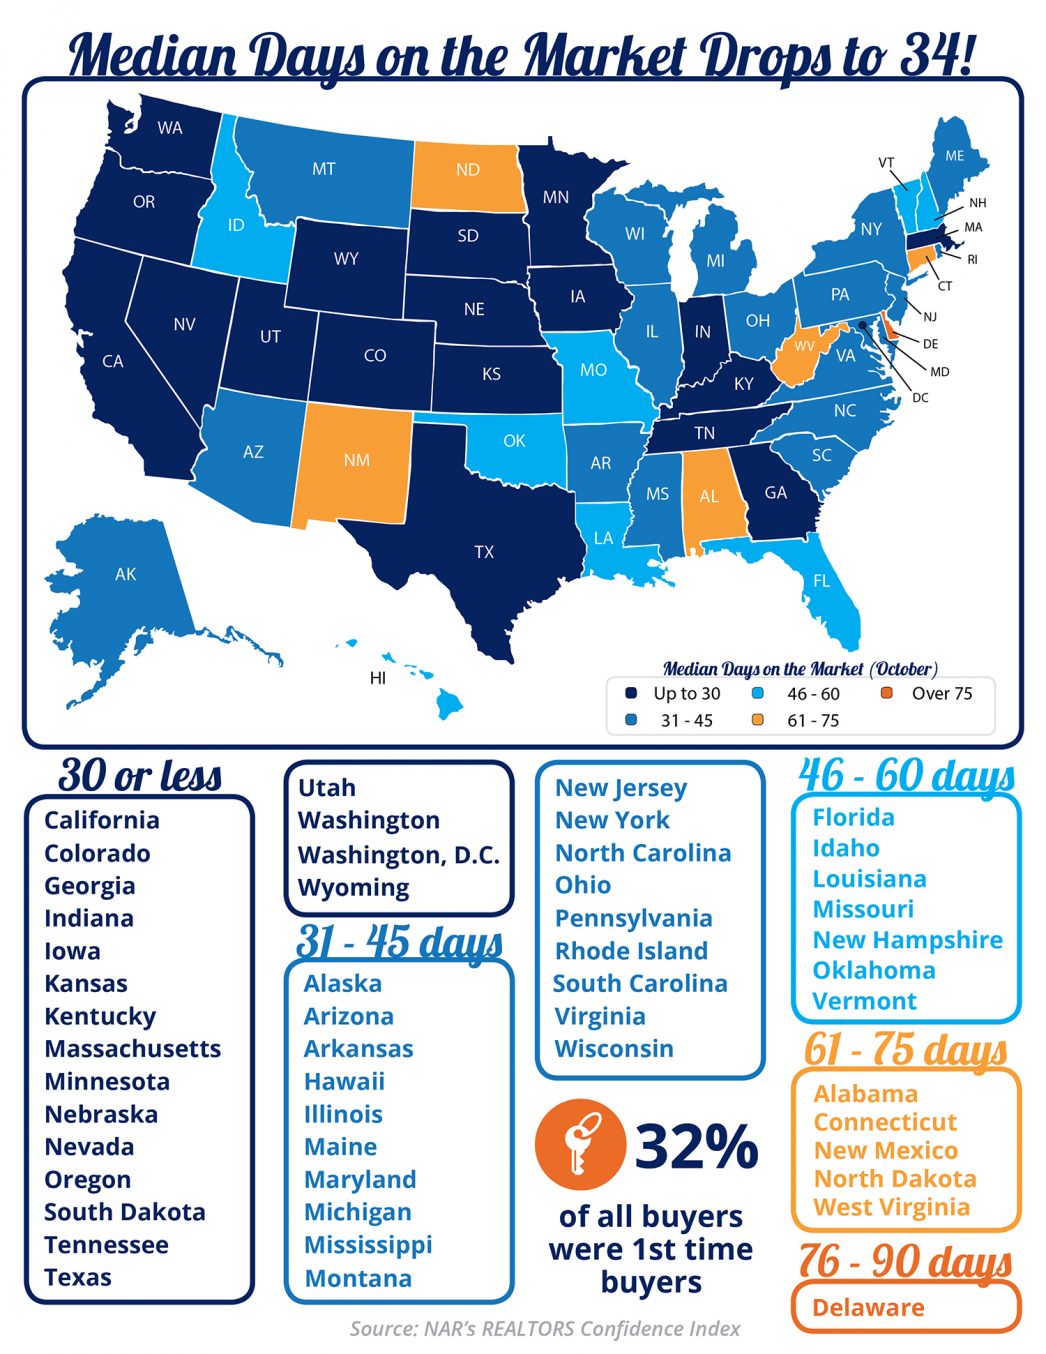 Median Days on the Market Drops to 34! [INFOGRAPHIC] | MyKCM